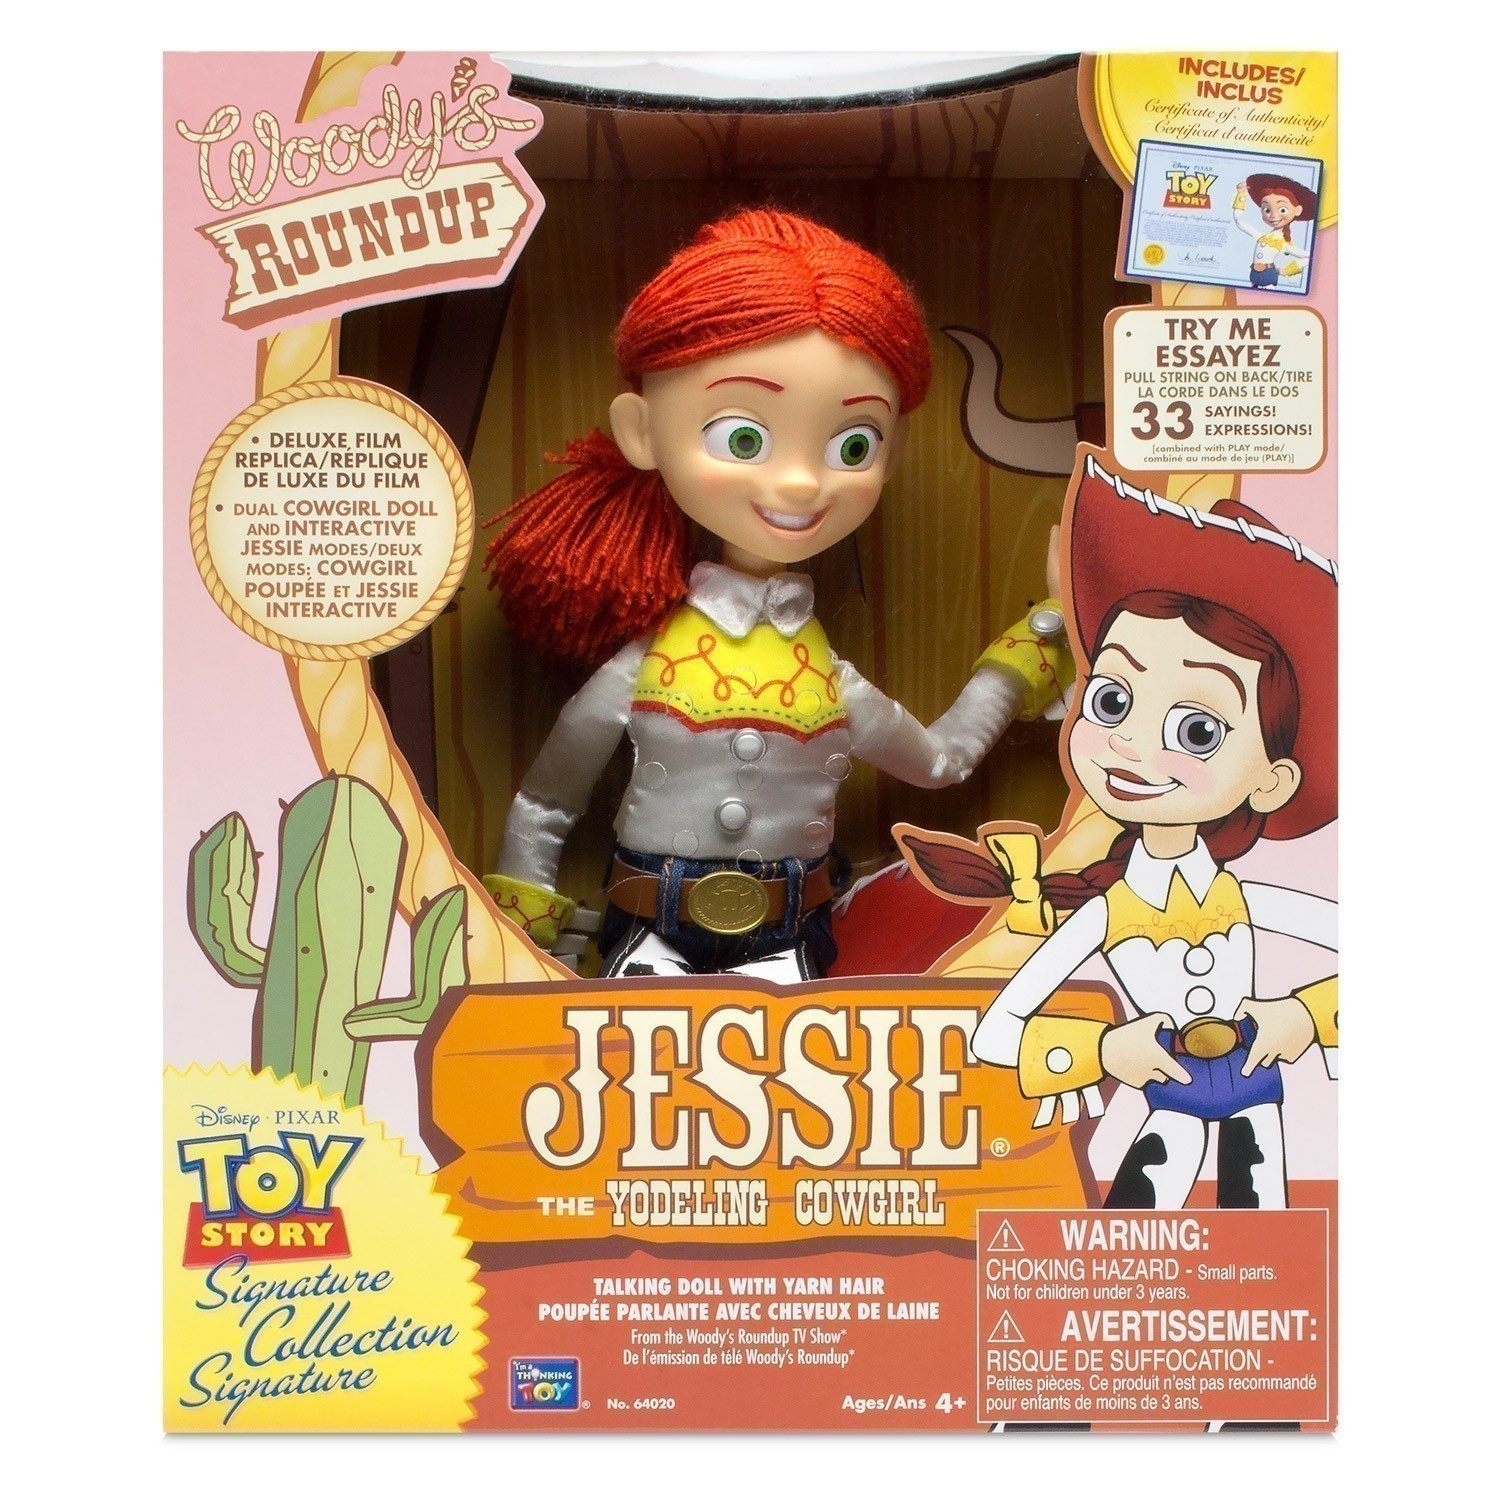 Toy Story - Jessie the Yodelling Cowgirl